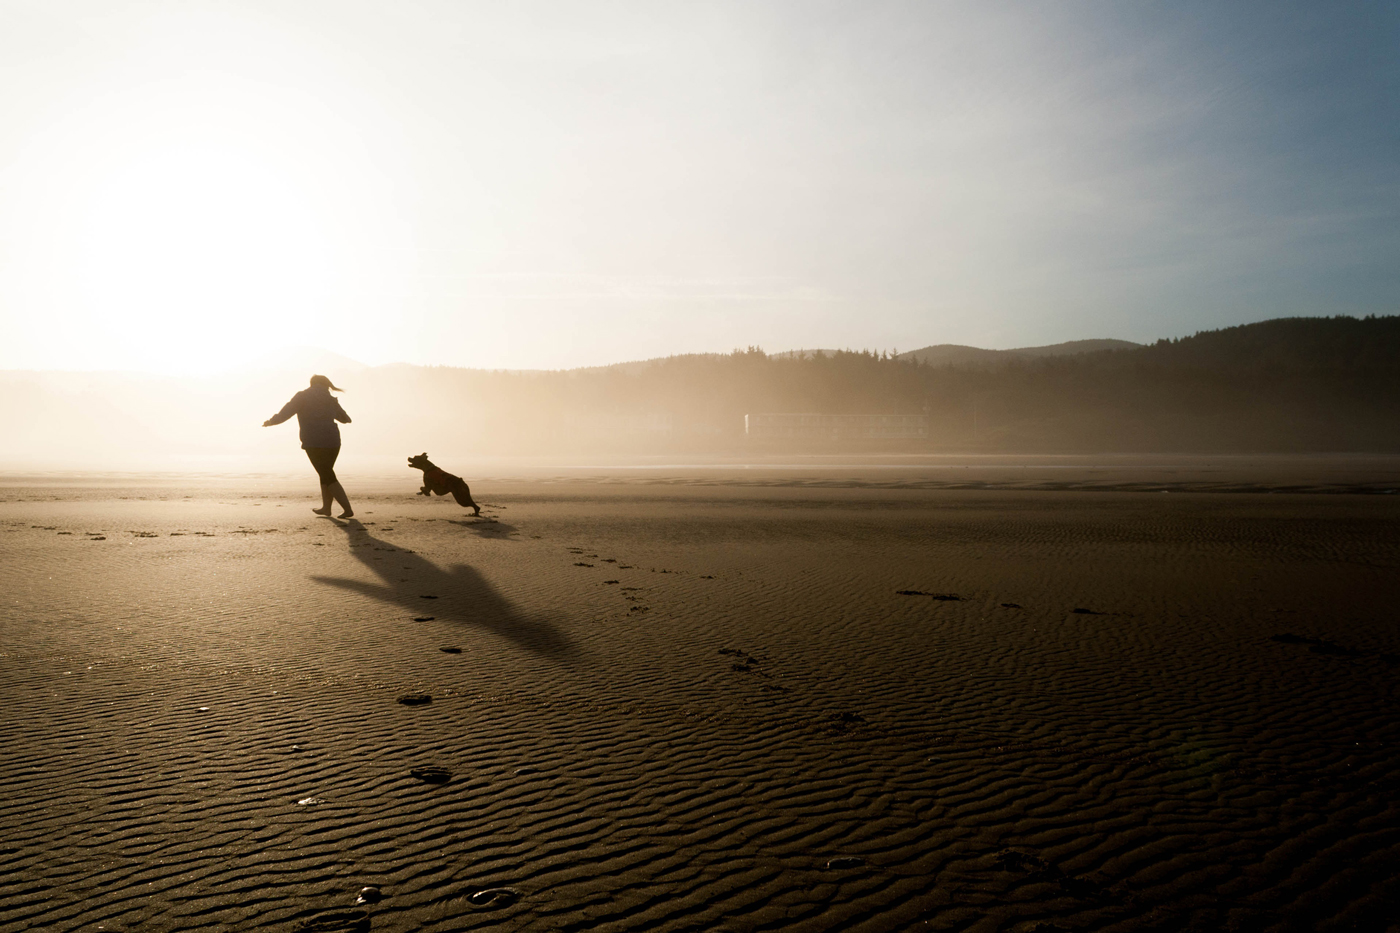 A man and his dog walking along a sandy beach at dusk with mist rolling in